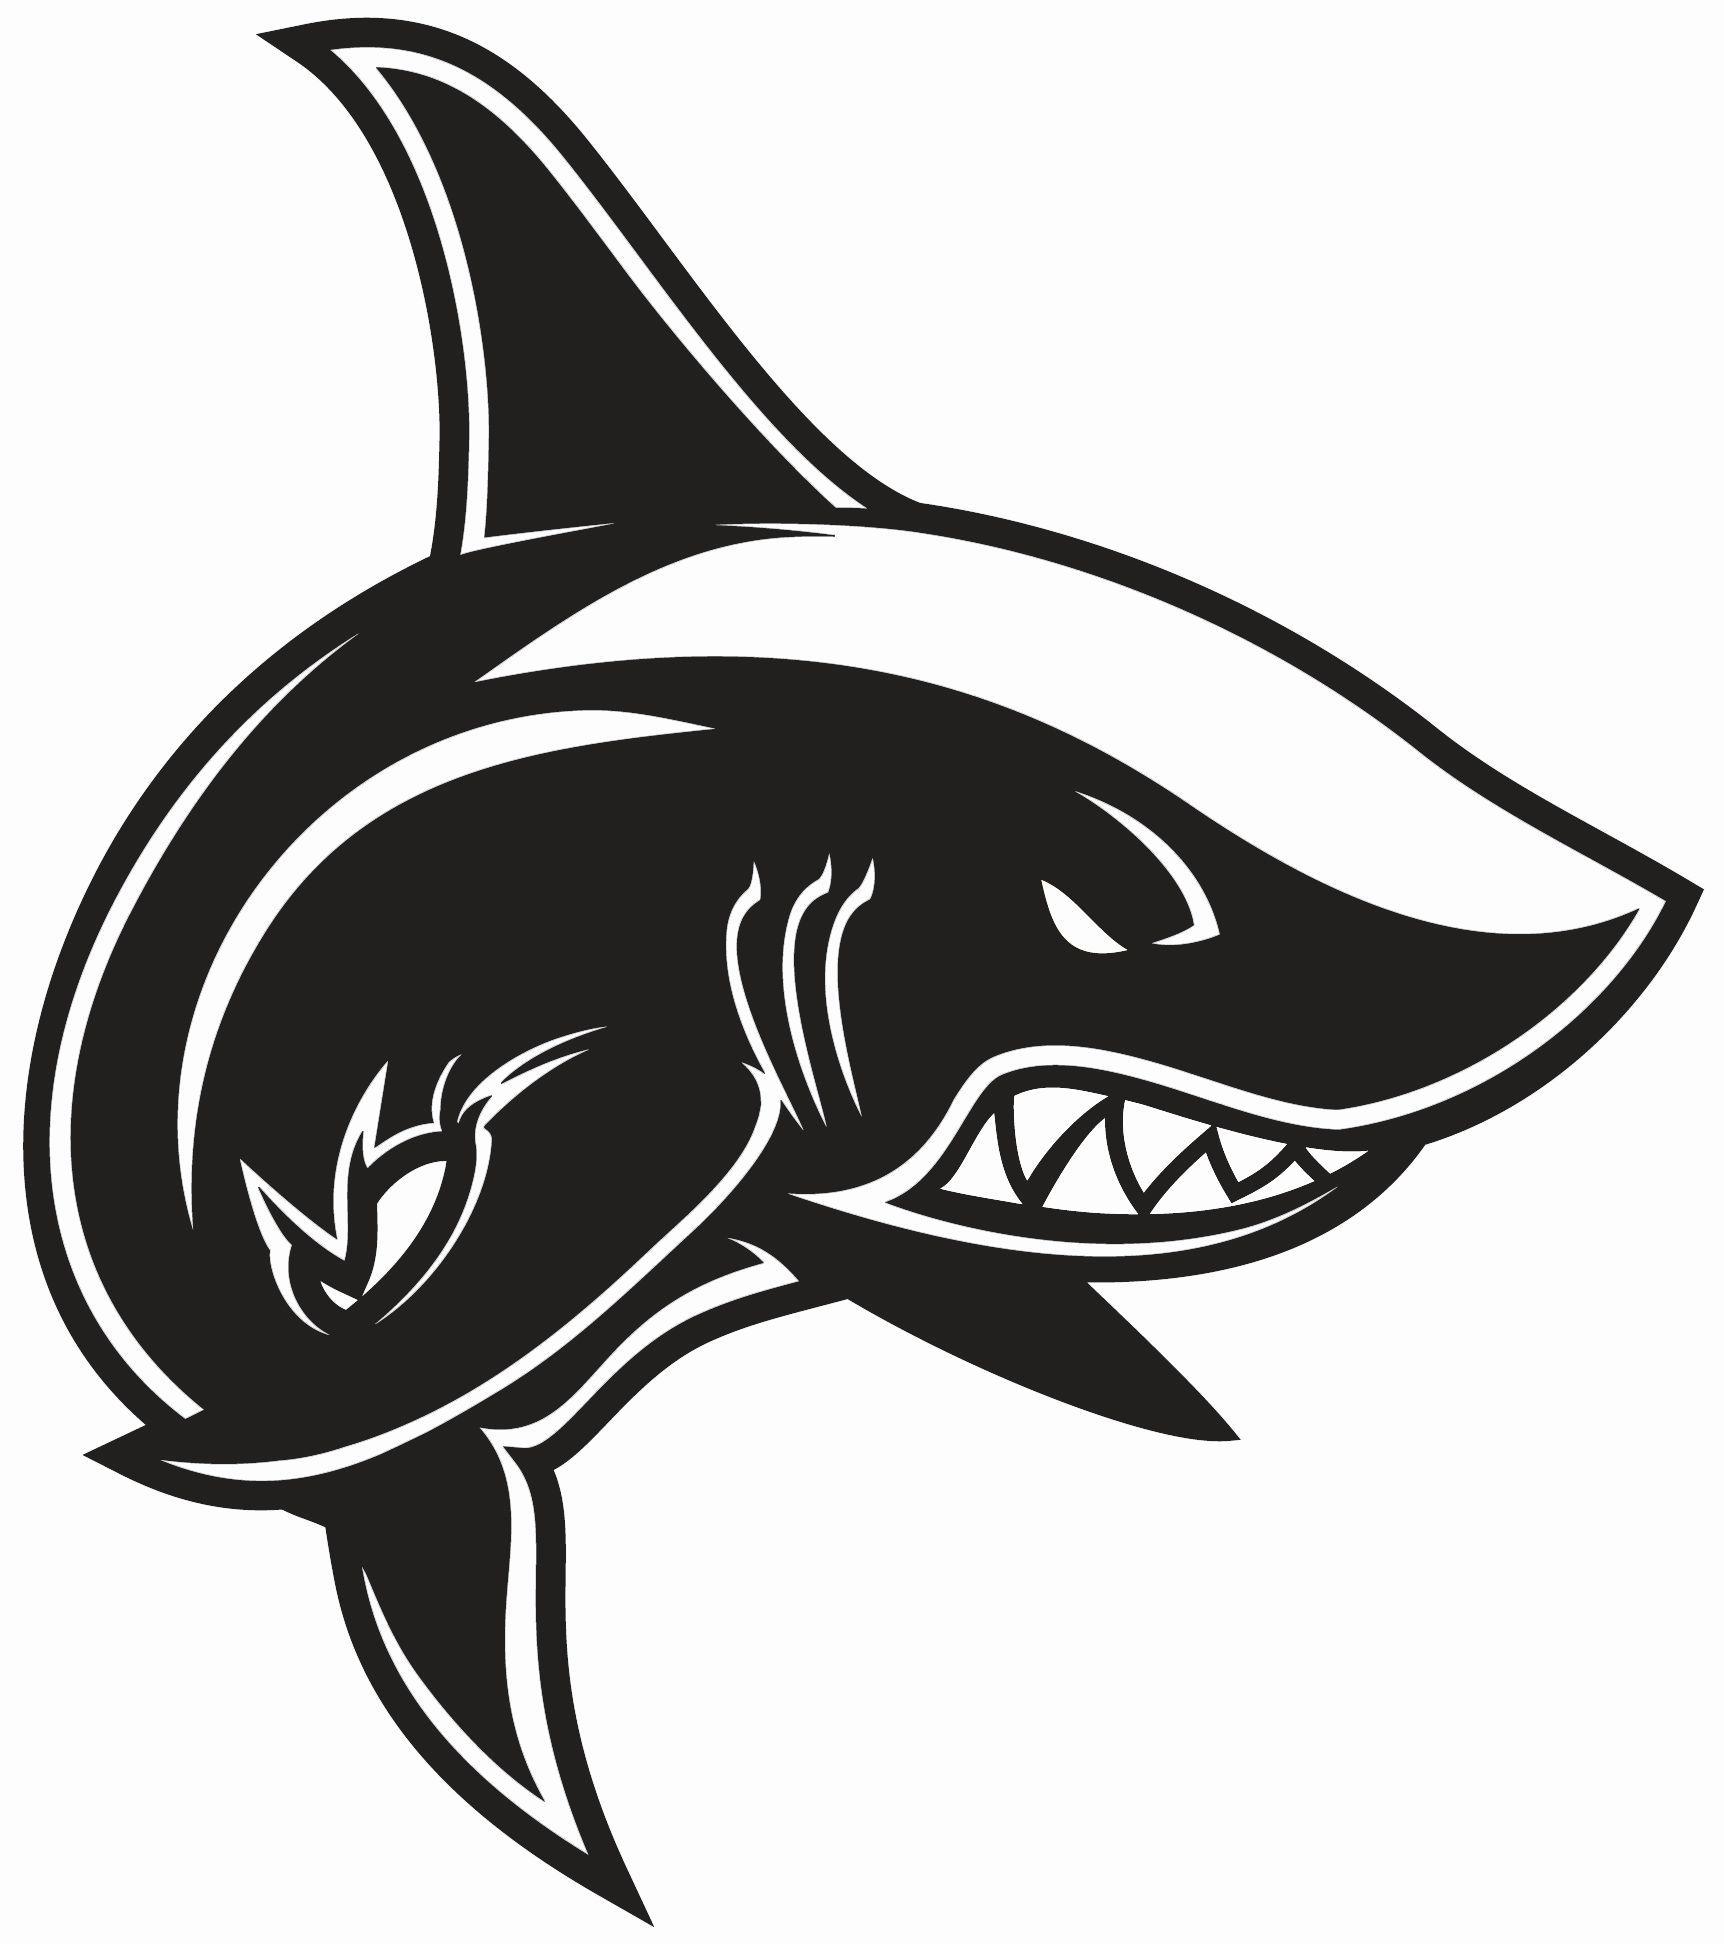 Tiger Shark Logo - Tiger Sharks Our Executive Committee